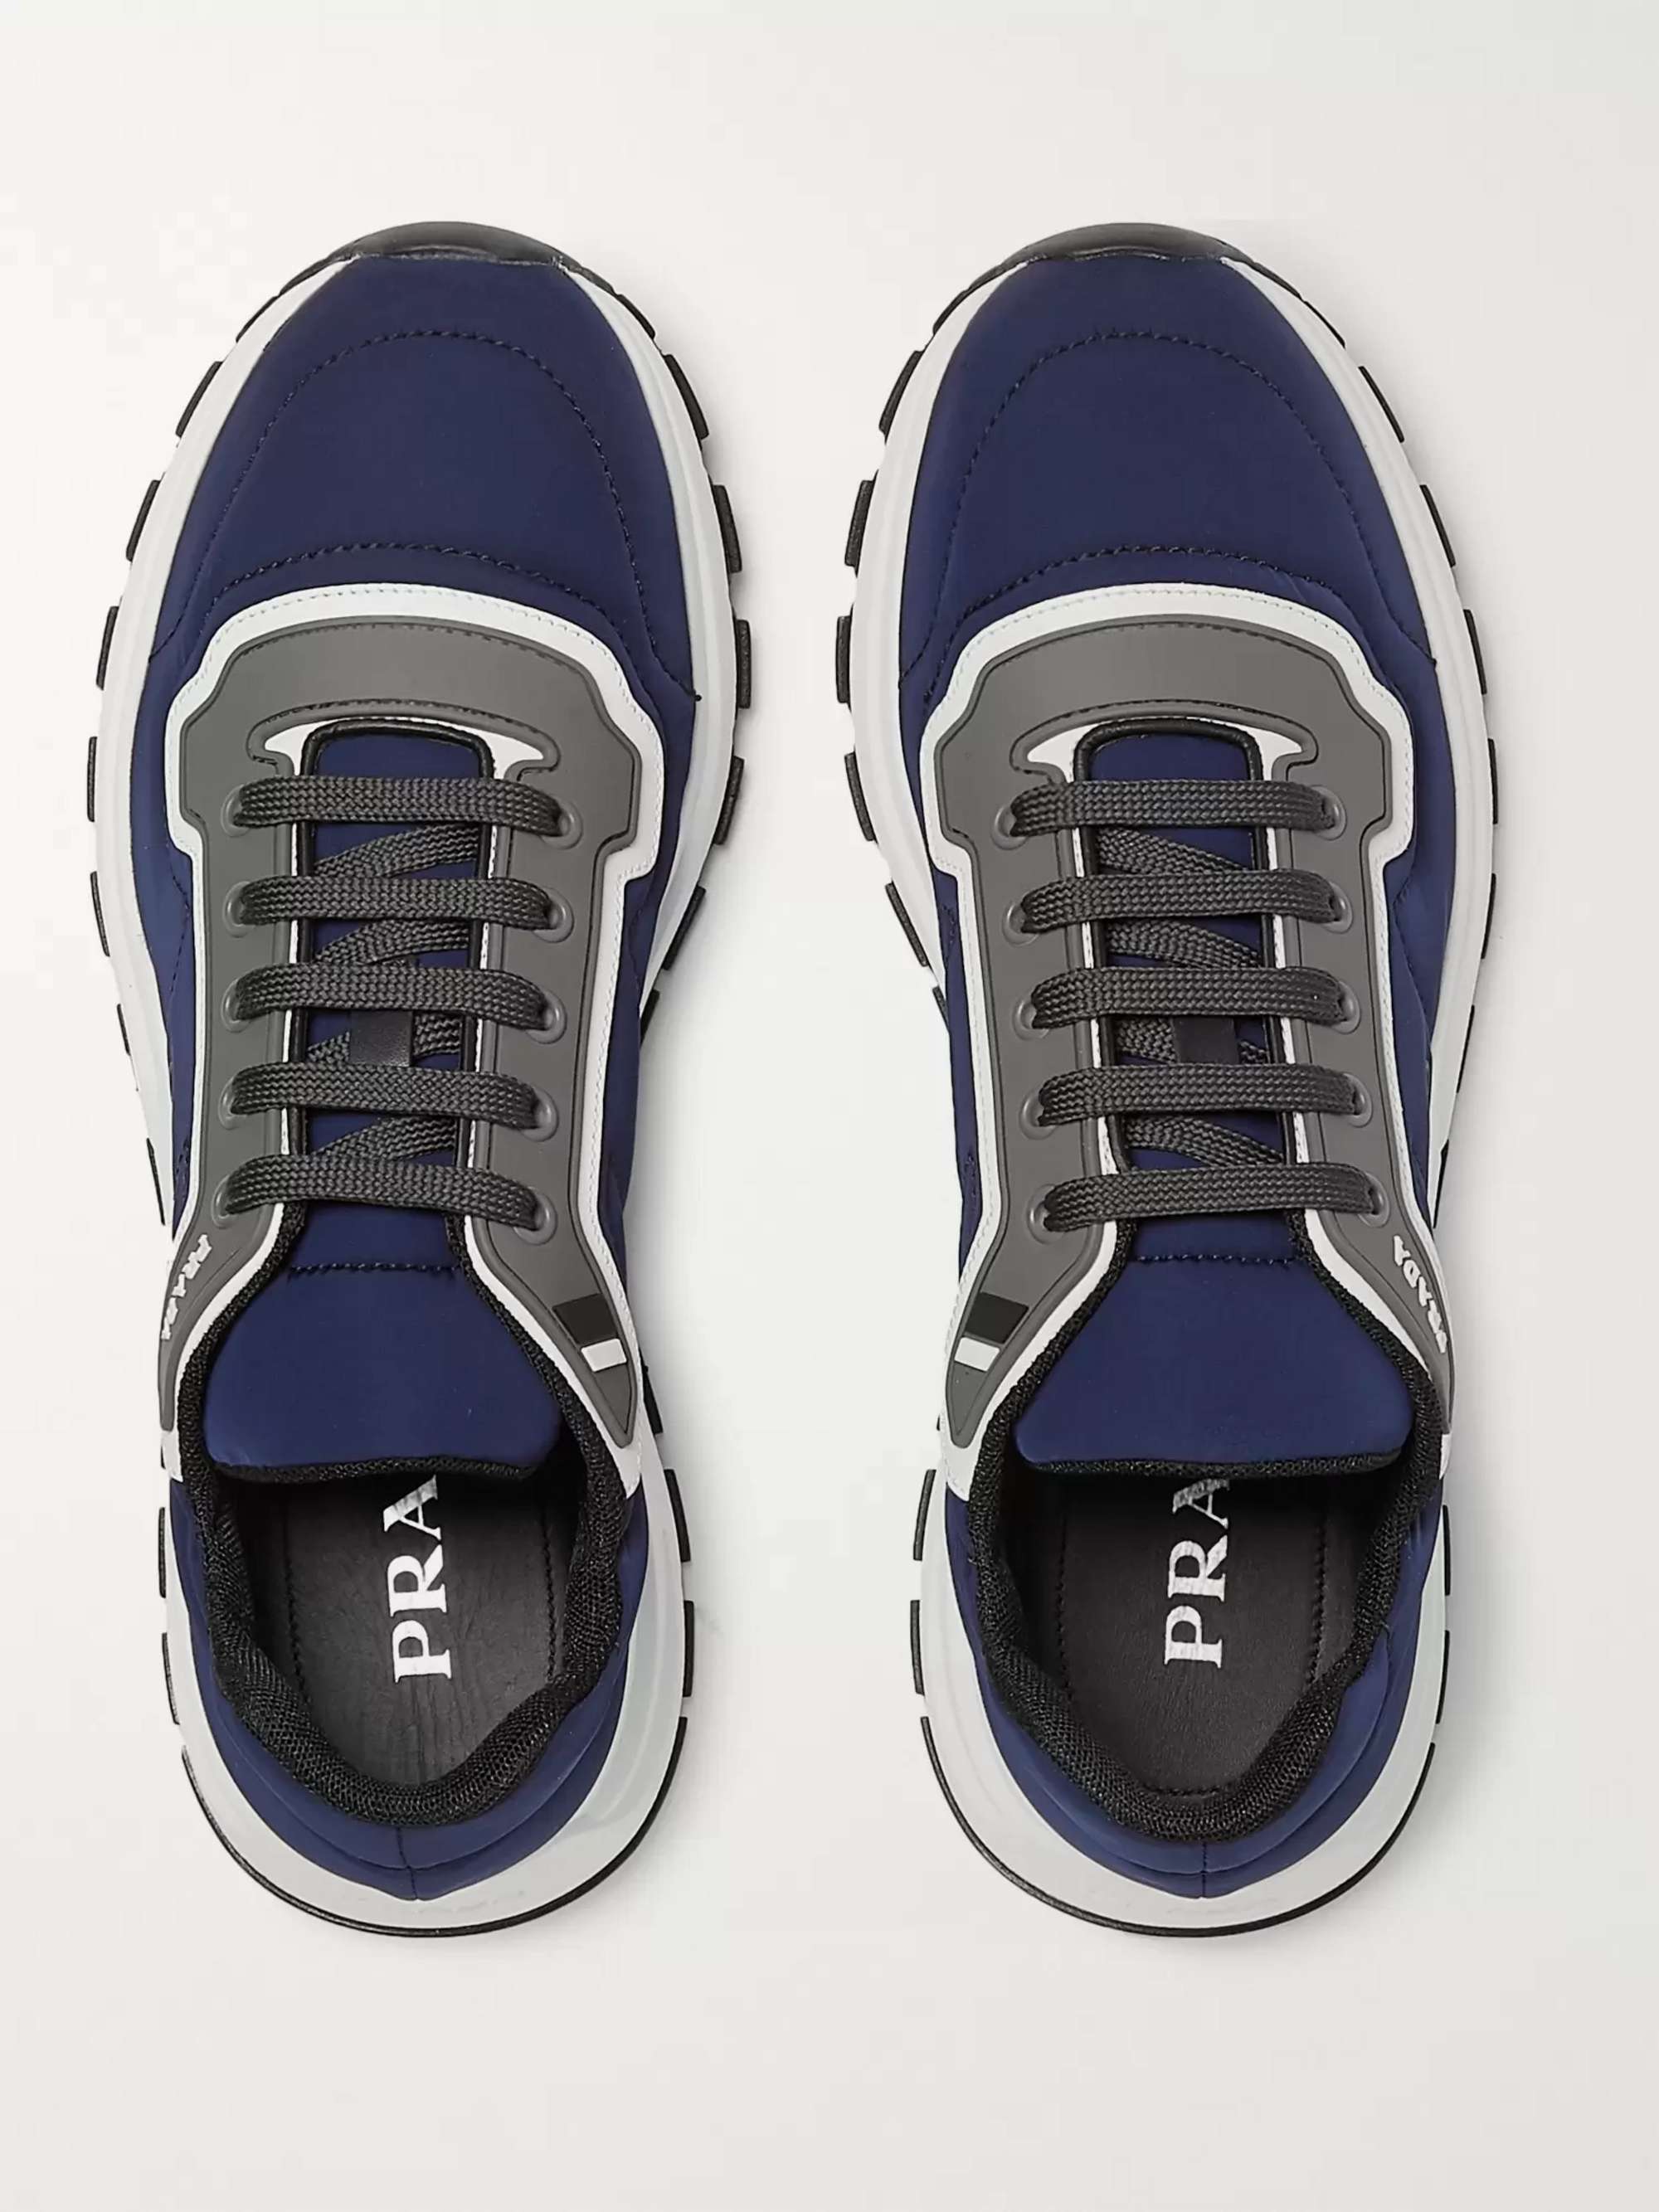 PRADA Match Race Rubber and Leather-Trimmed Nylon Sneakers